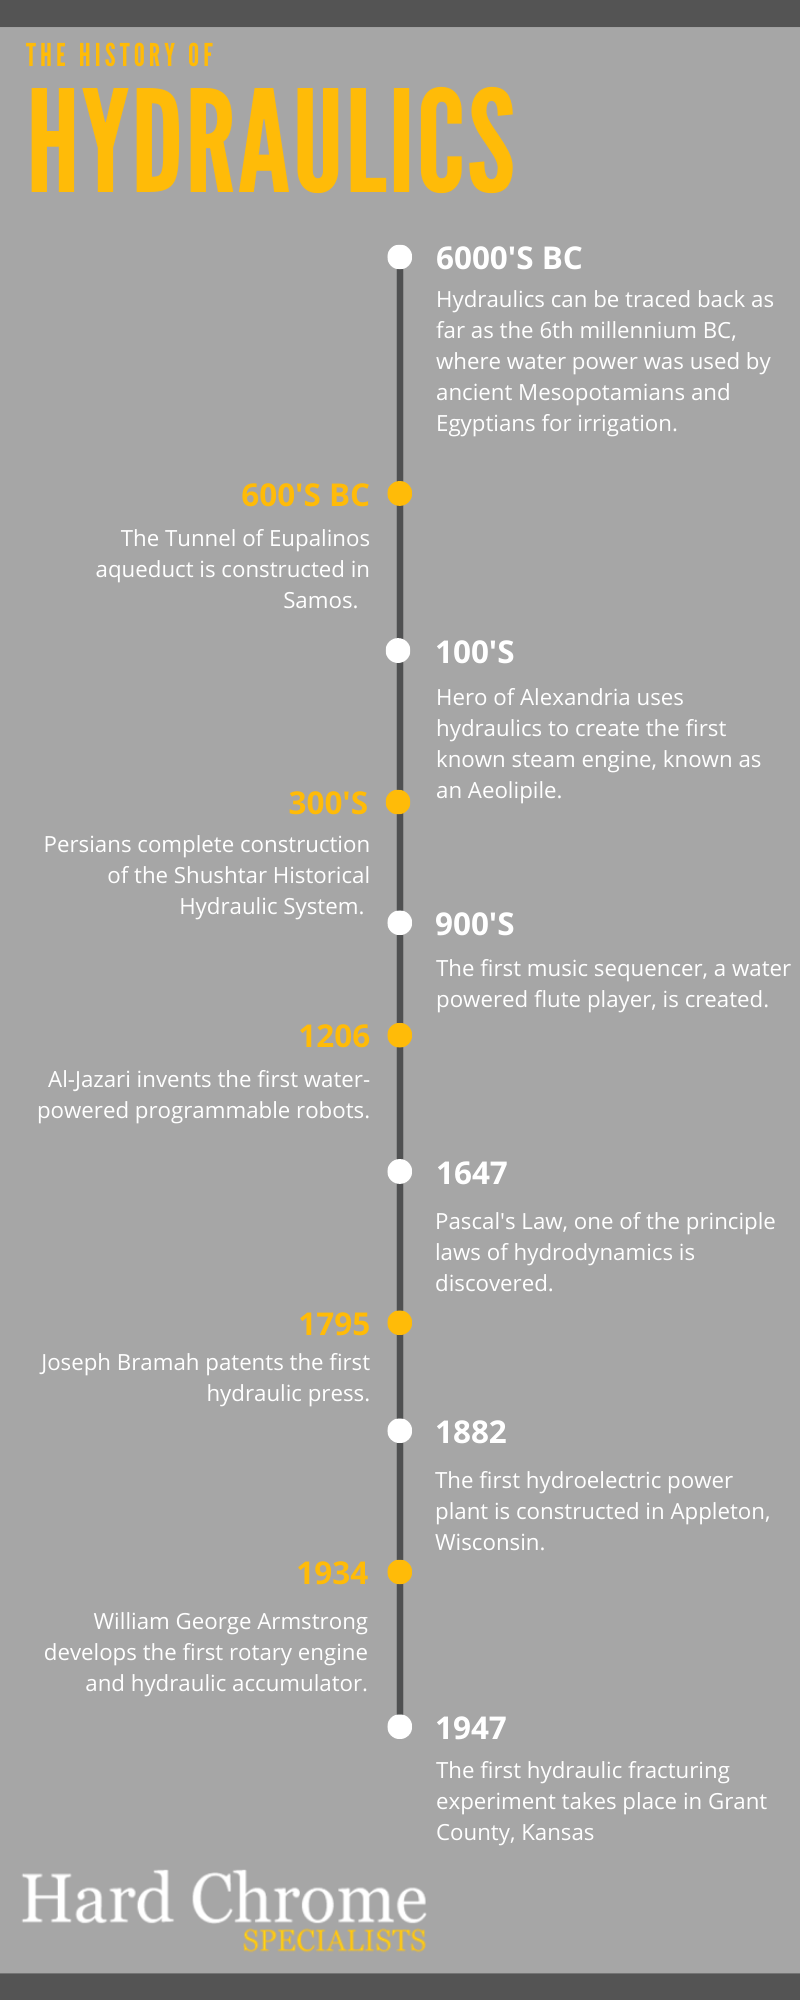 The History of Hydraulics Infographic